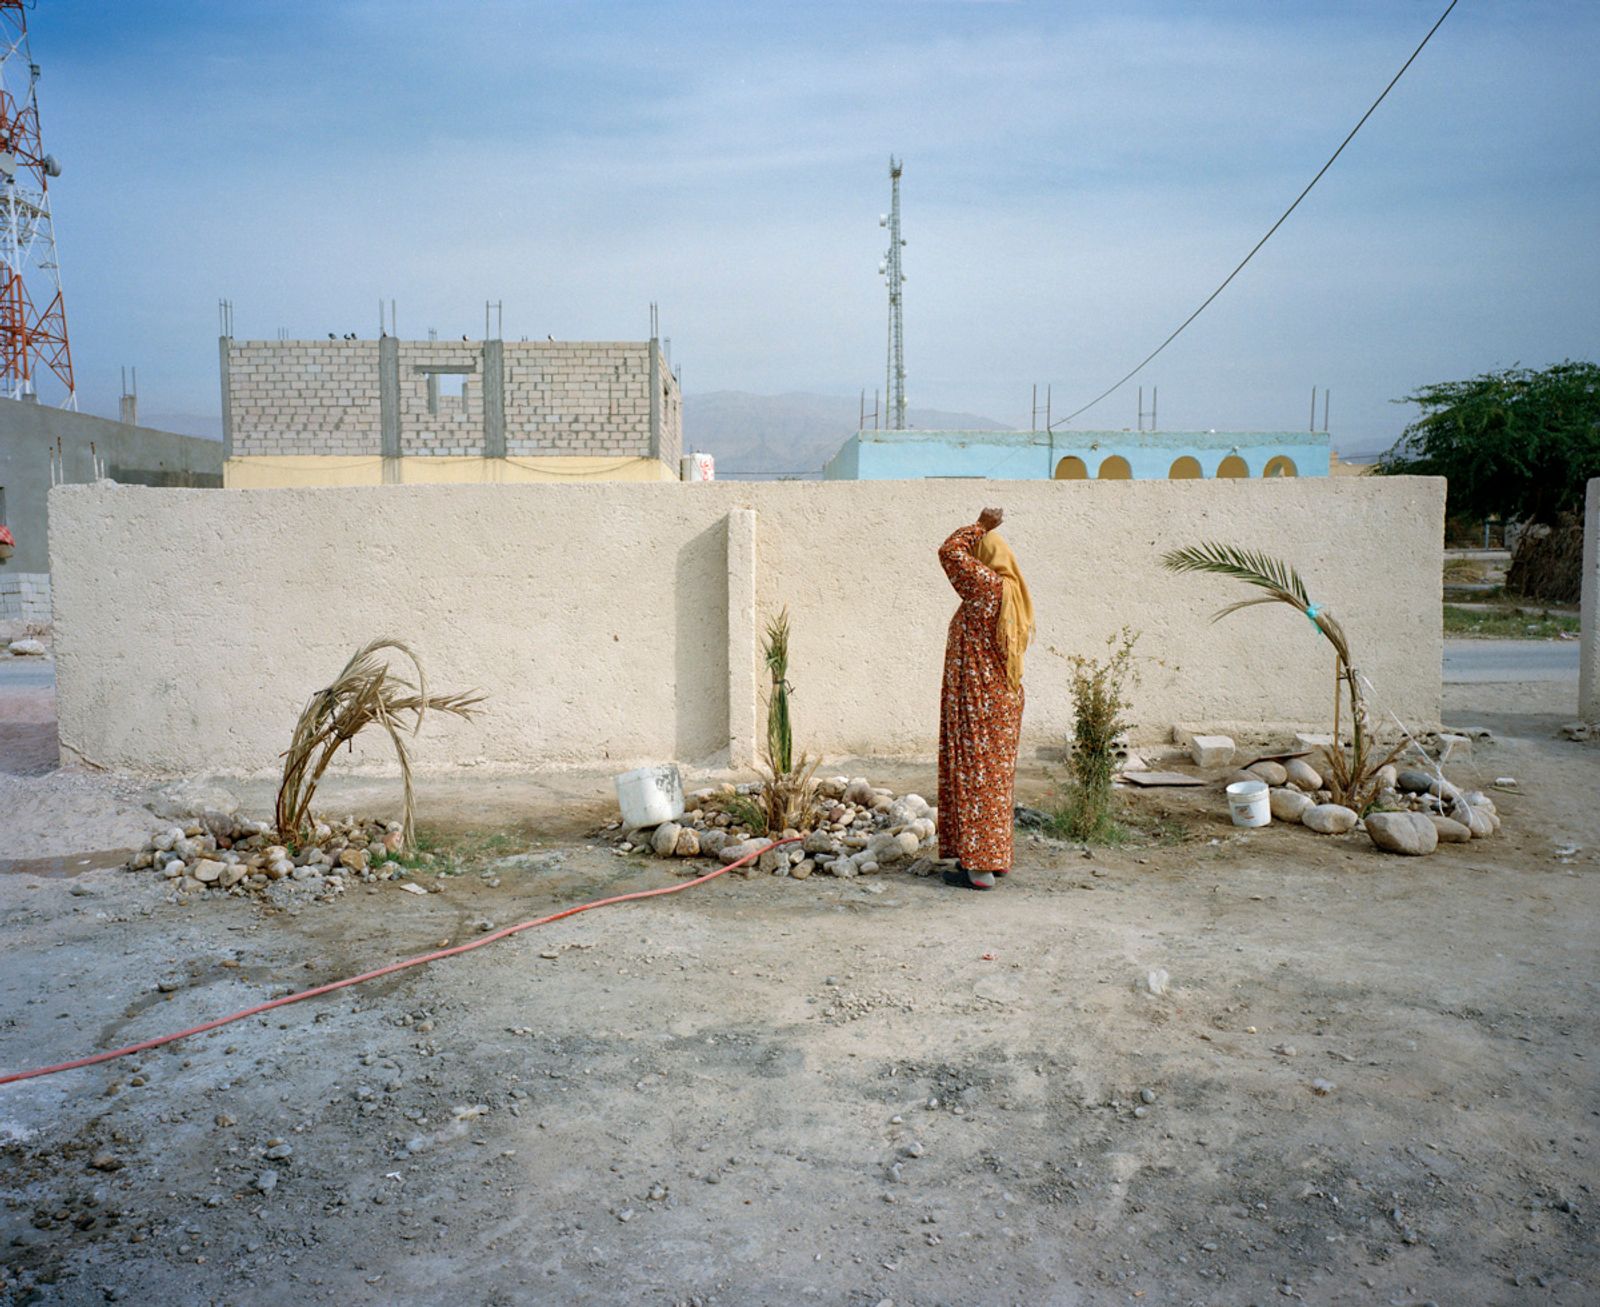 © Nadia Bseiso, 2020 Aftermath Project Grant winner